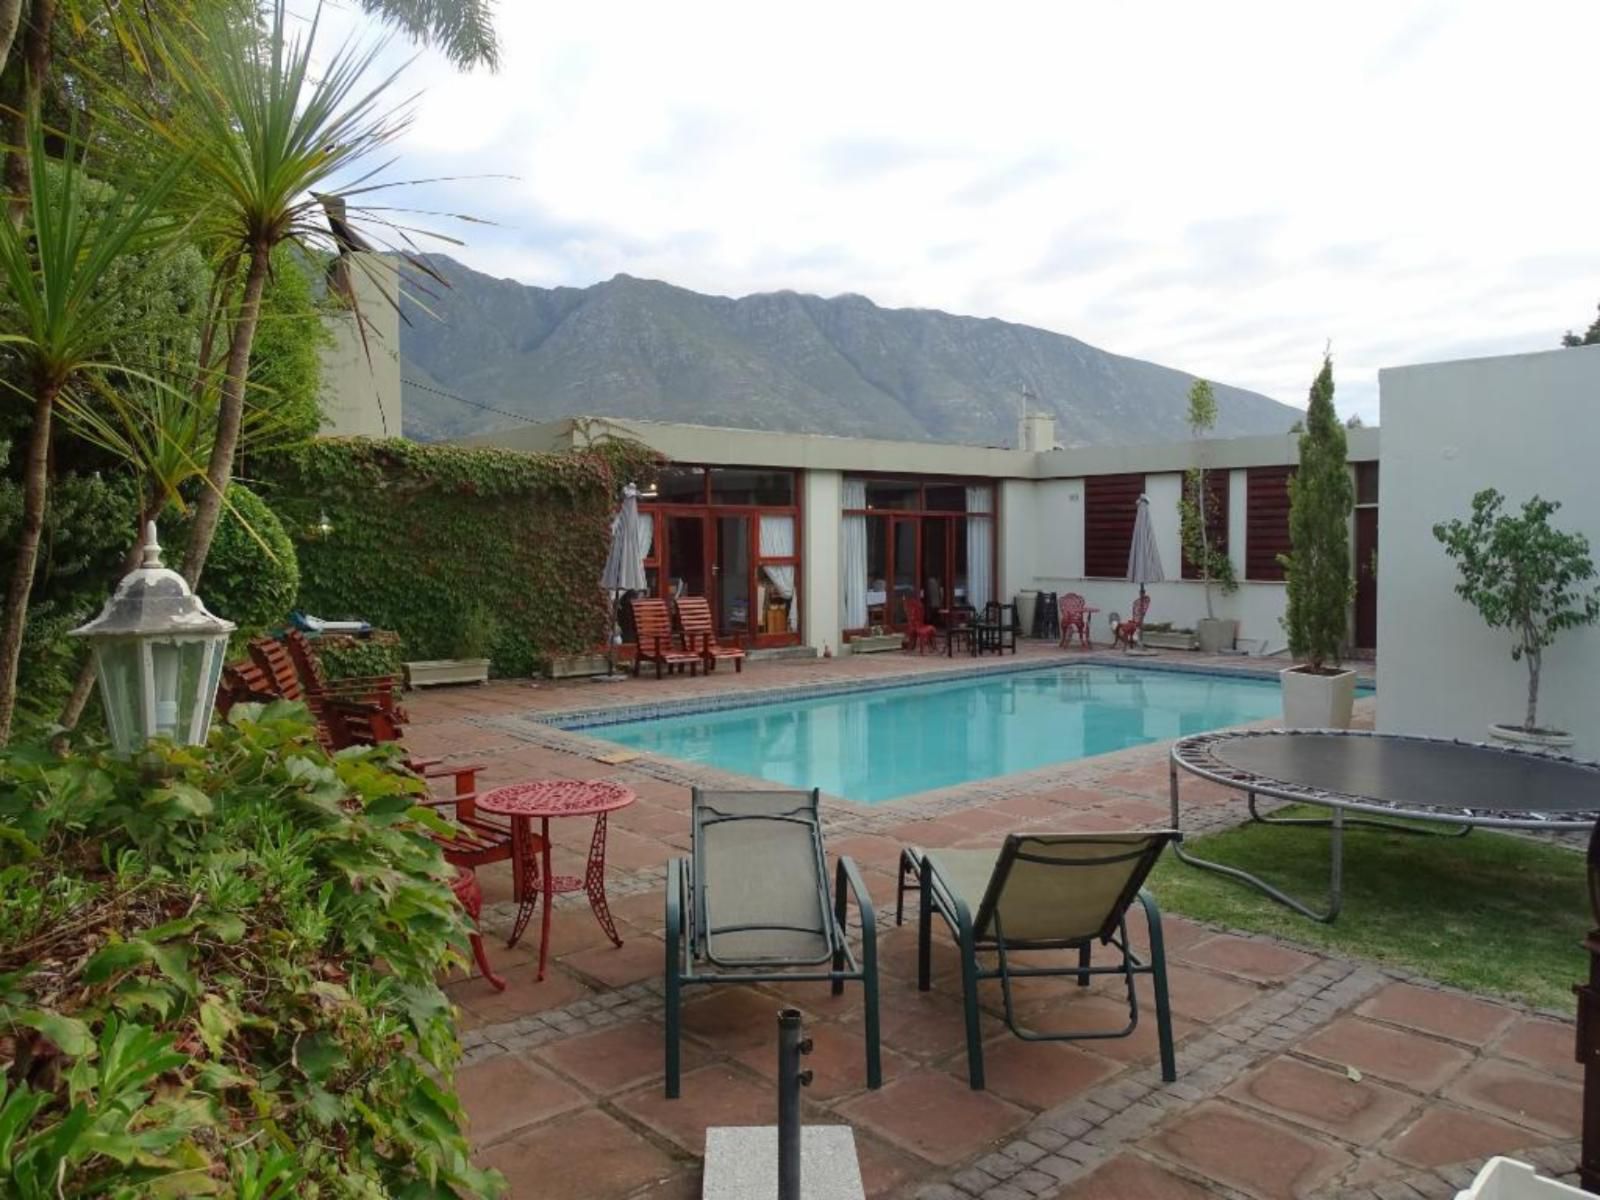 Aanhuizen Guest House Swellendam Western Cape South Africa House, Building, Architecture, Palm Tree, Plant, Nature, Wood, Swimming Pool